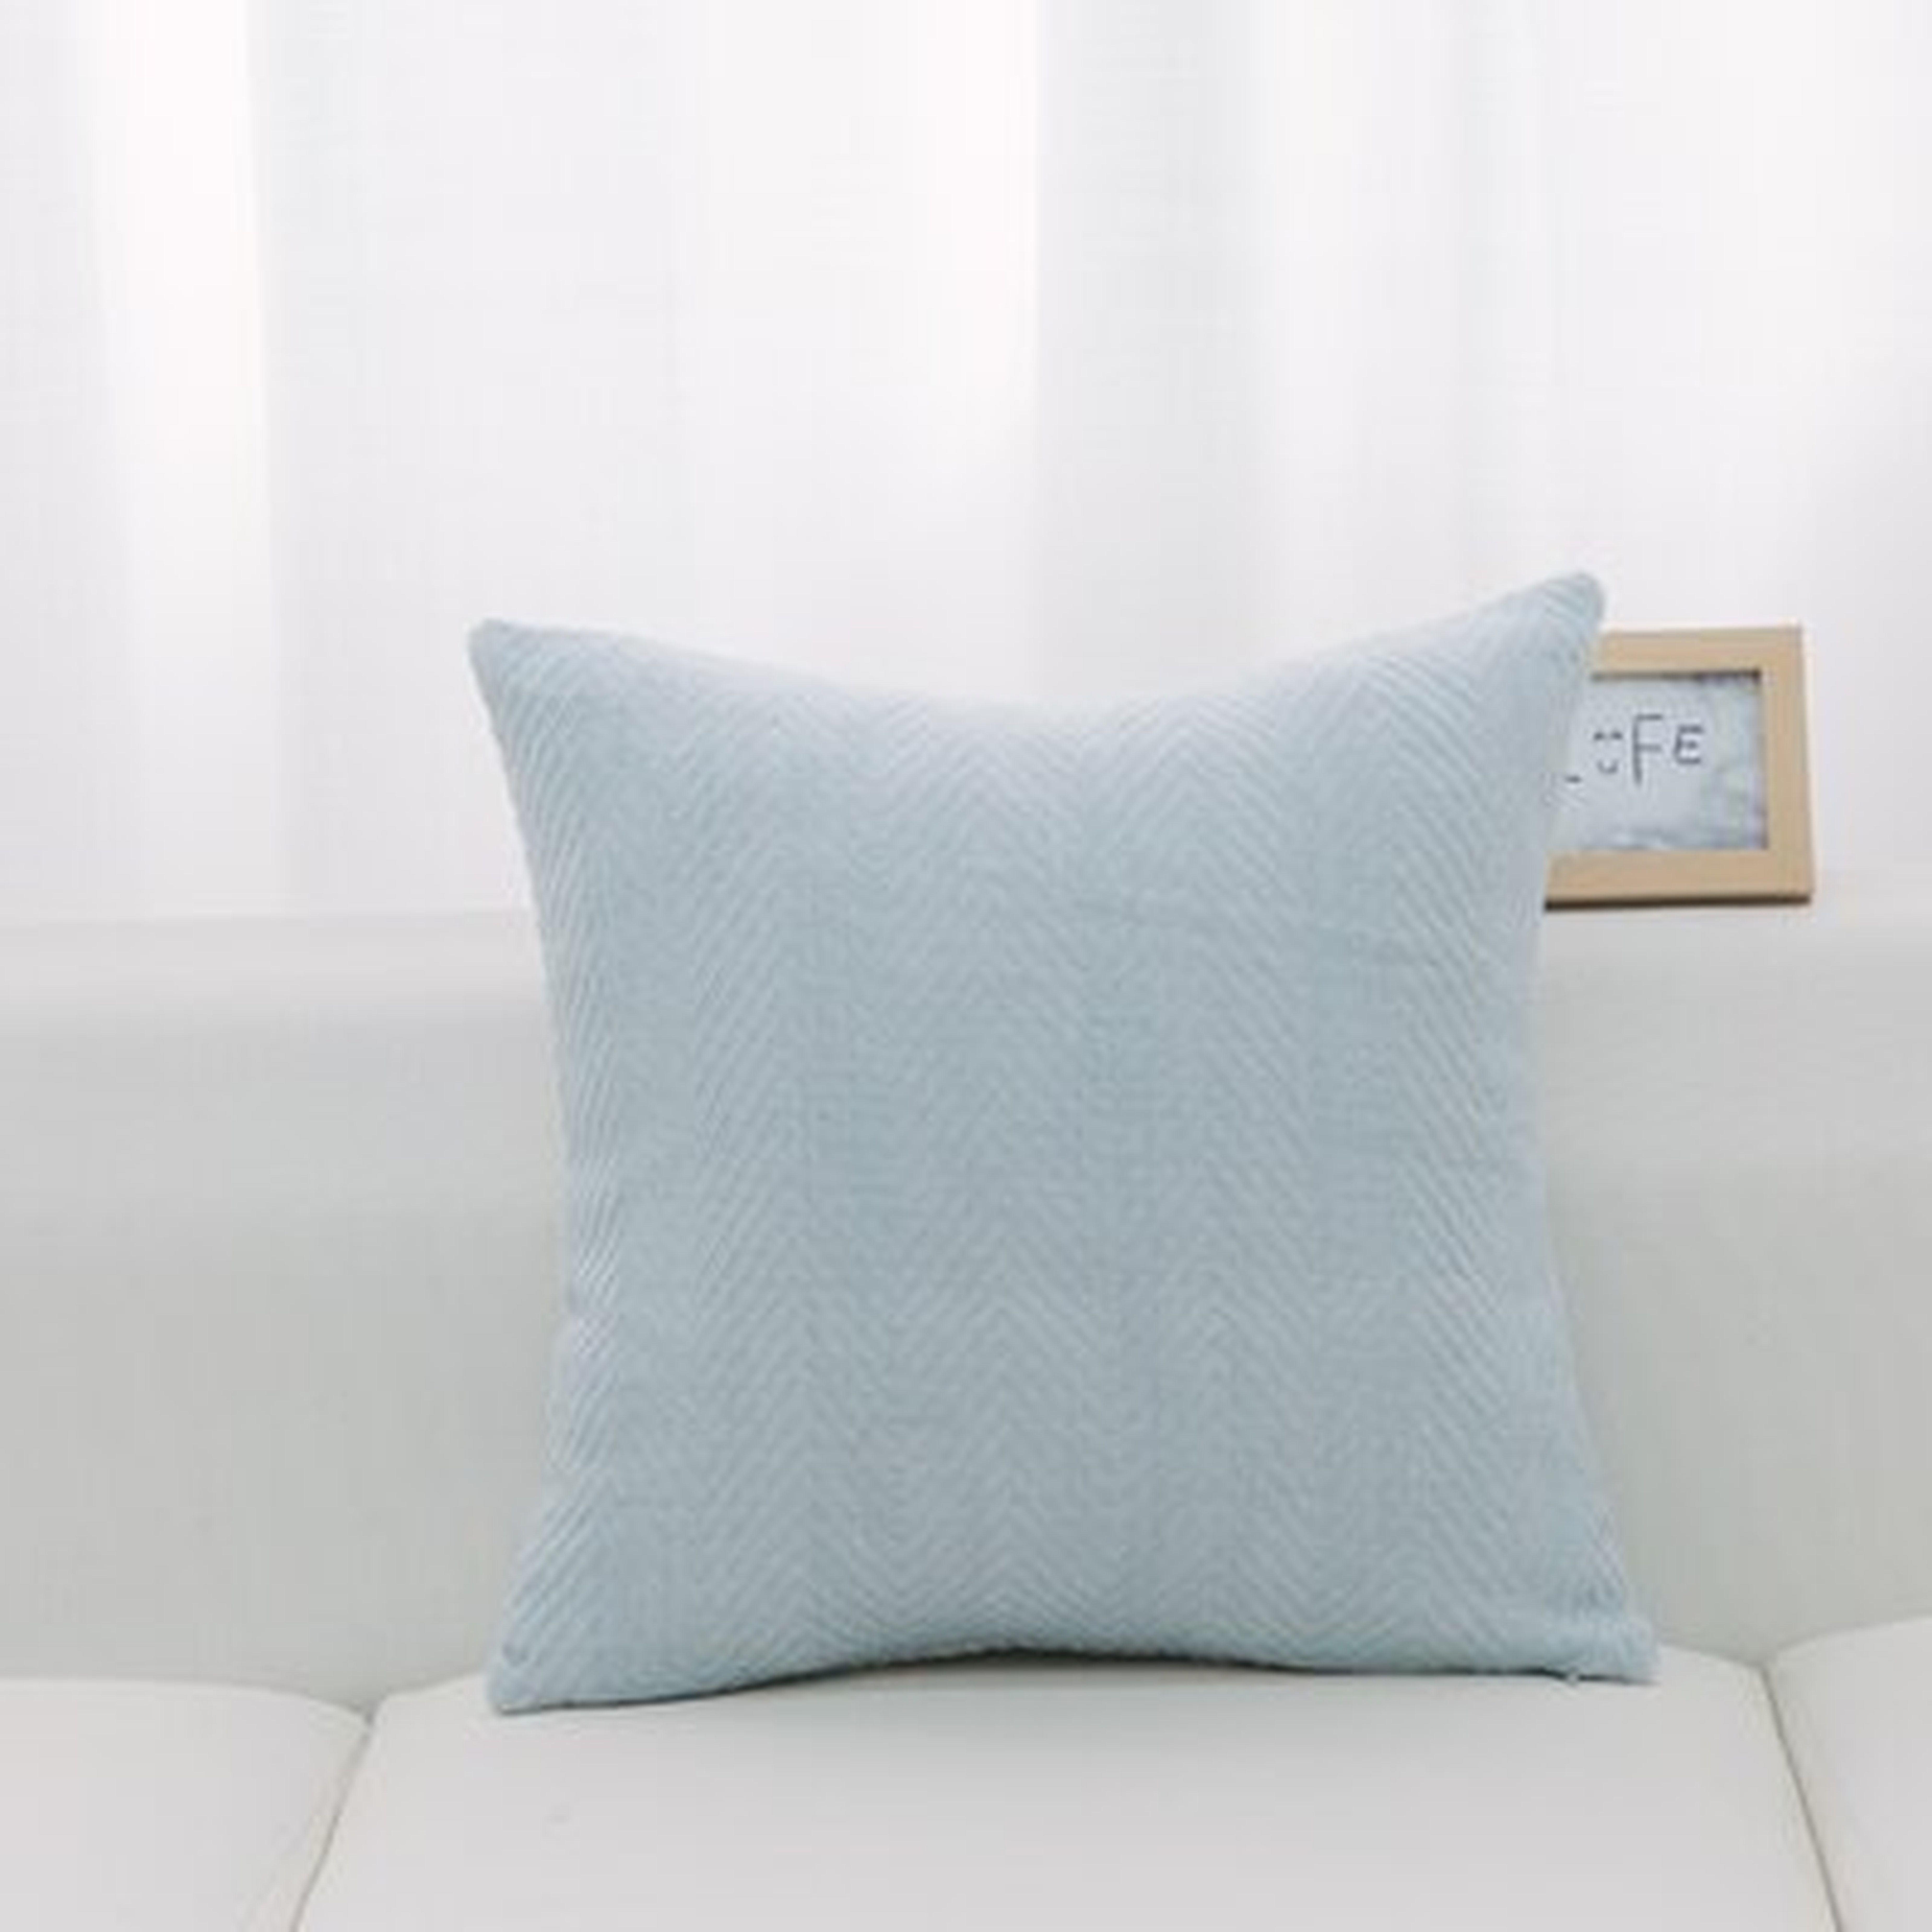 Wilmer Square Pillow Cover and Insert - Wayfair